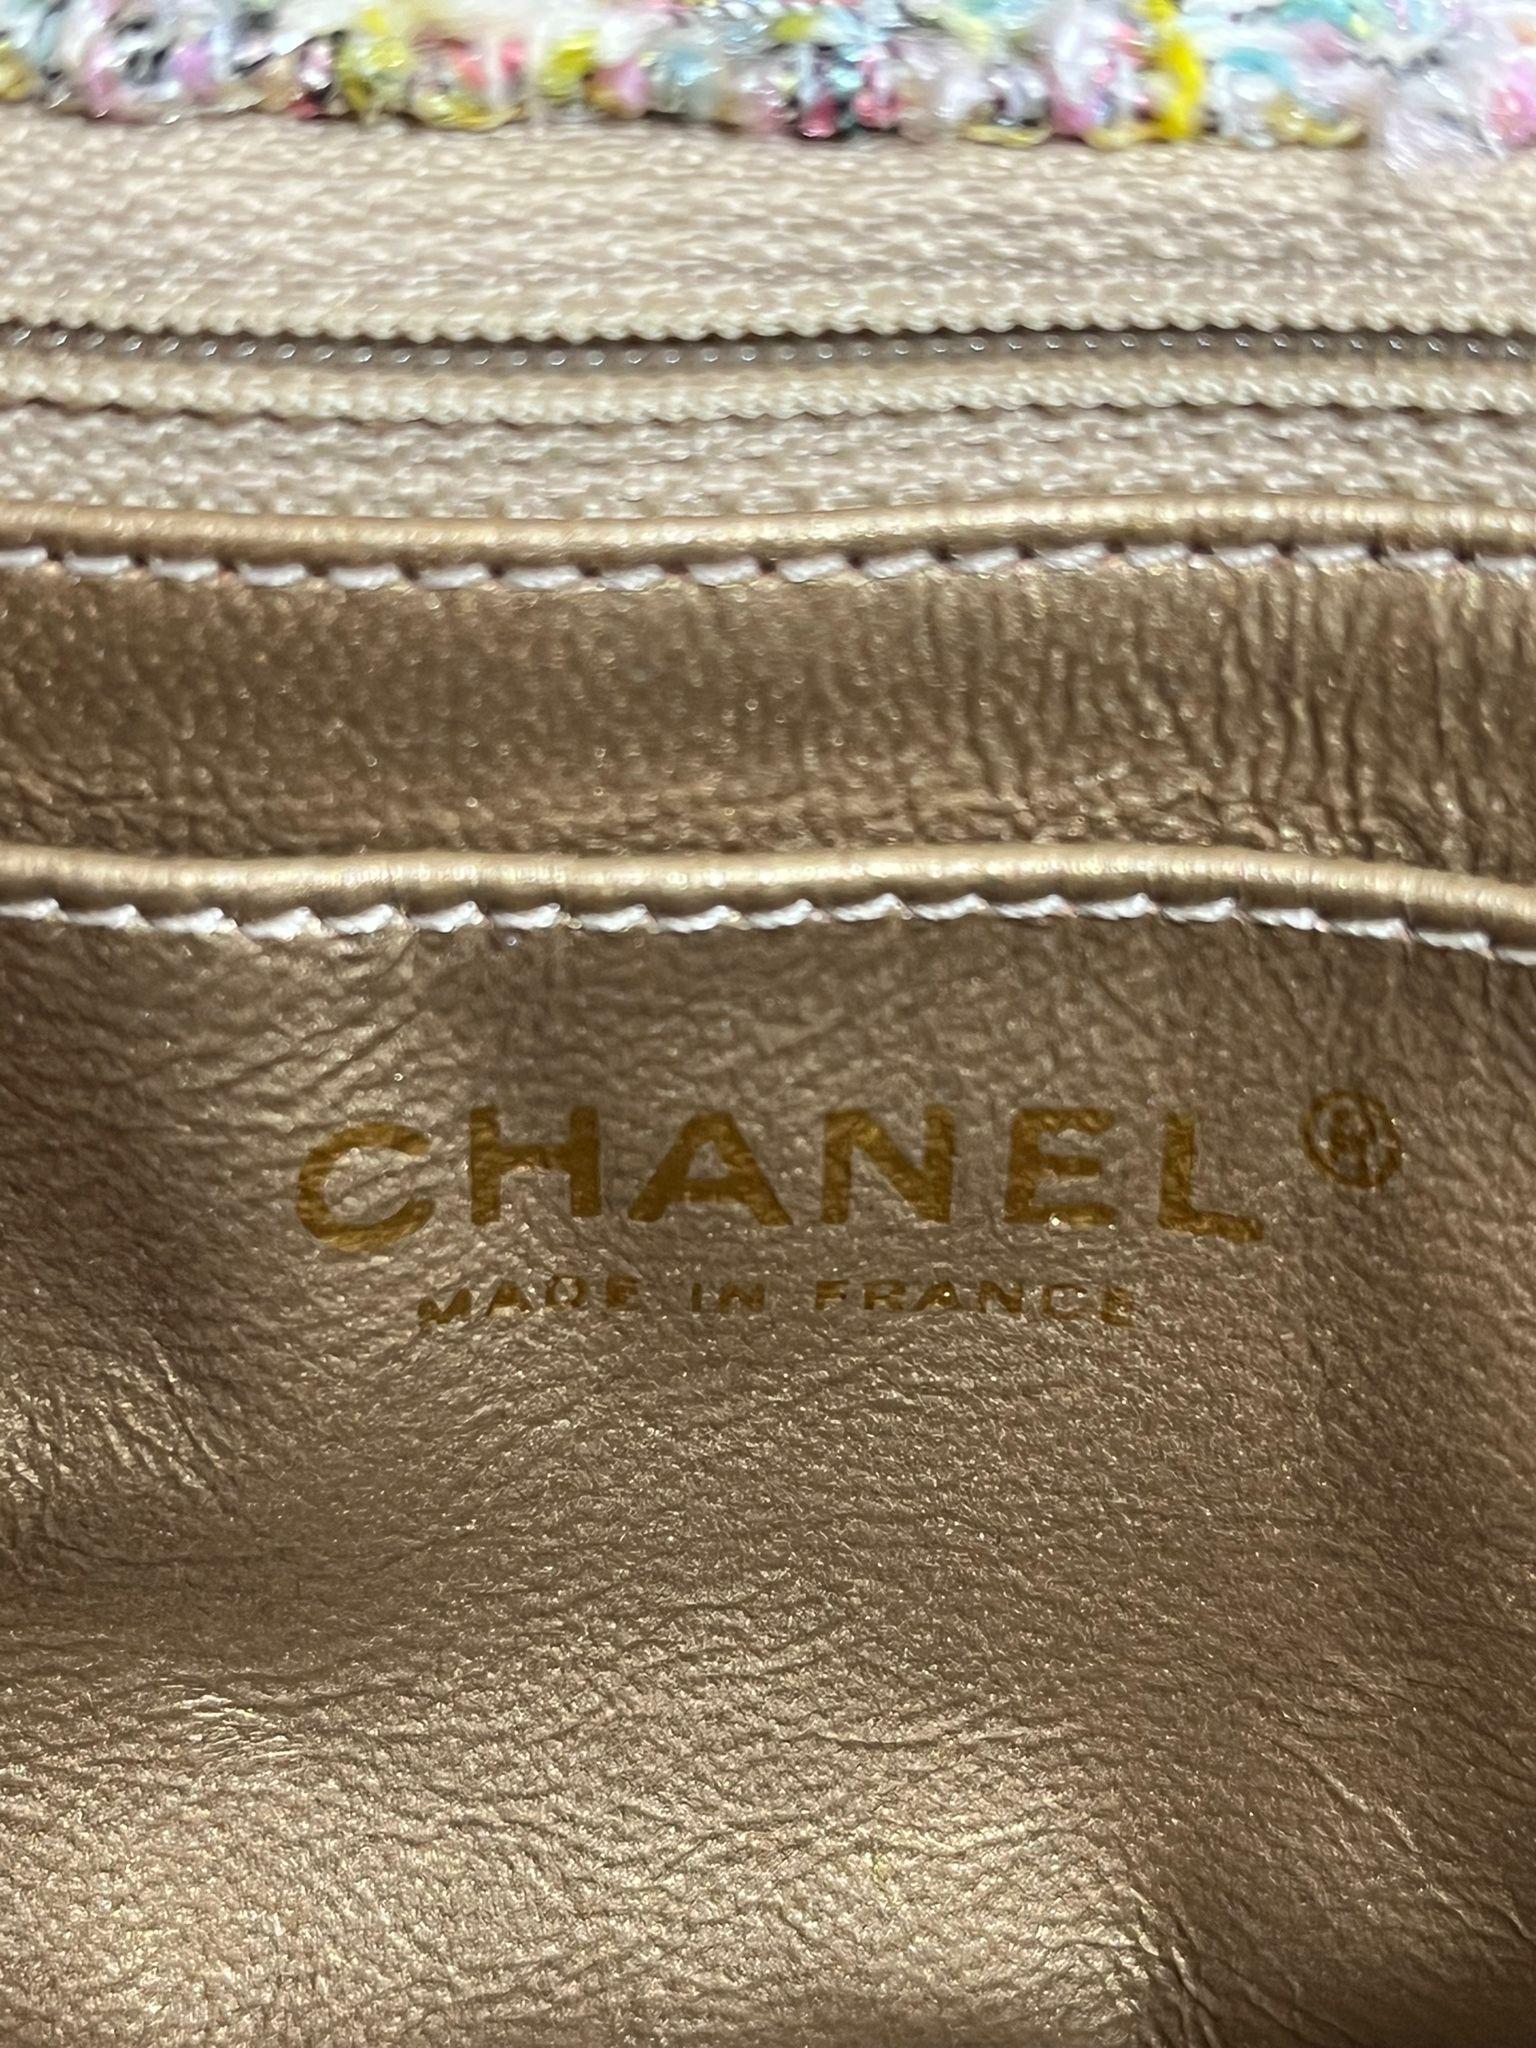 Chanel Ltd Edition Tweed Garden Party Charm Bag For Sale 7